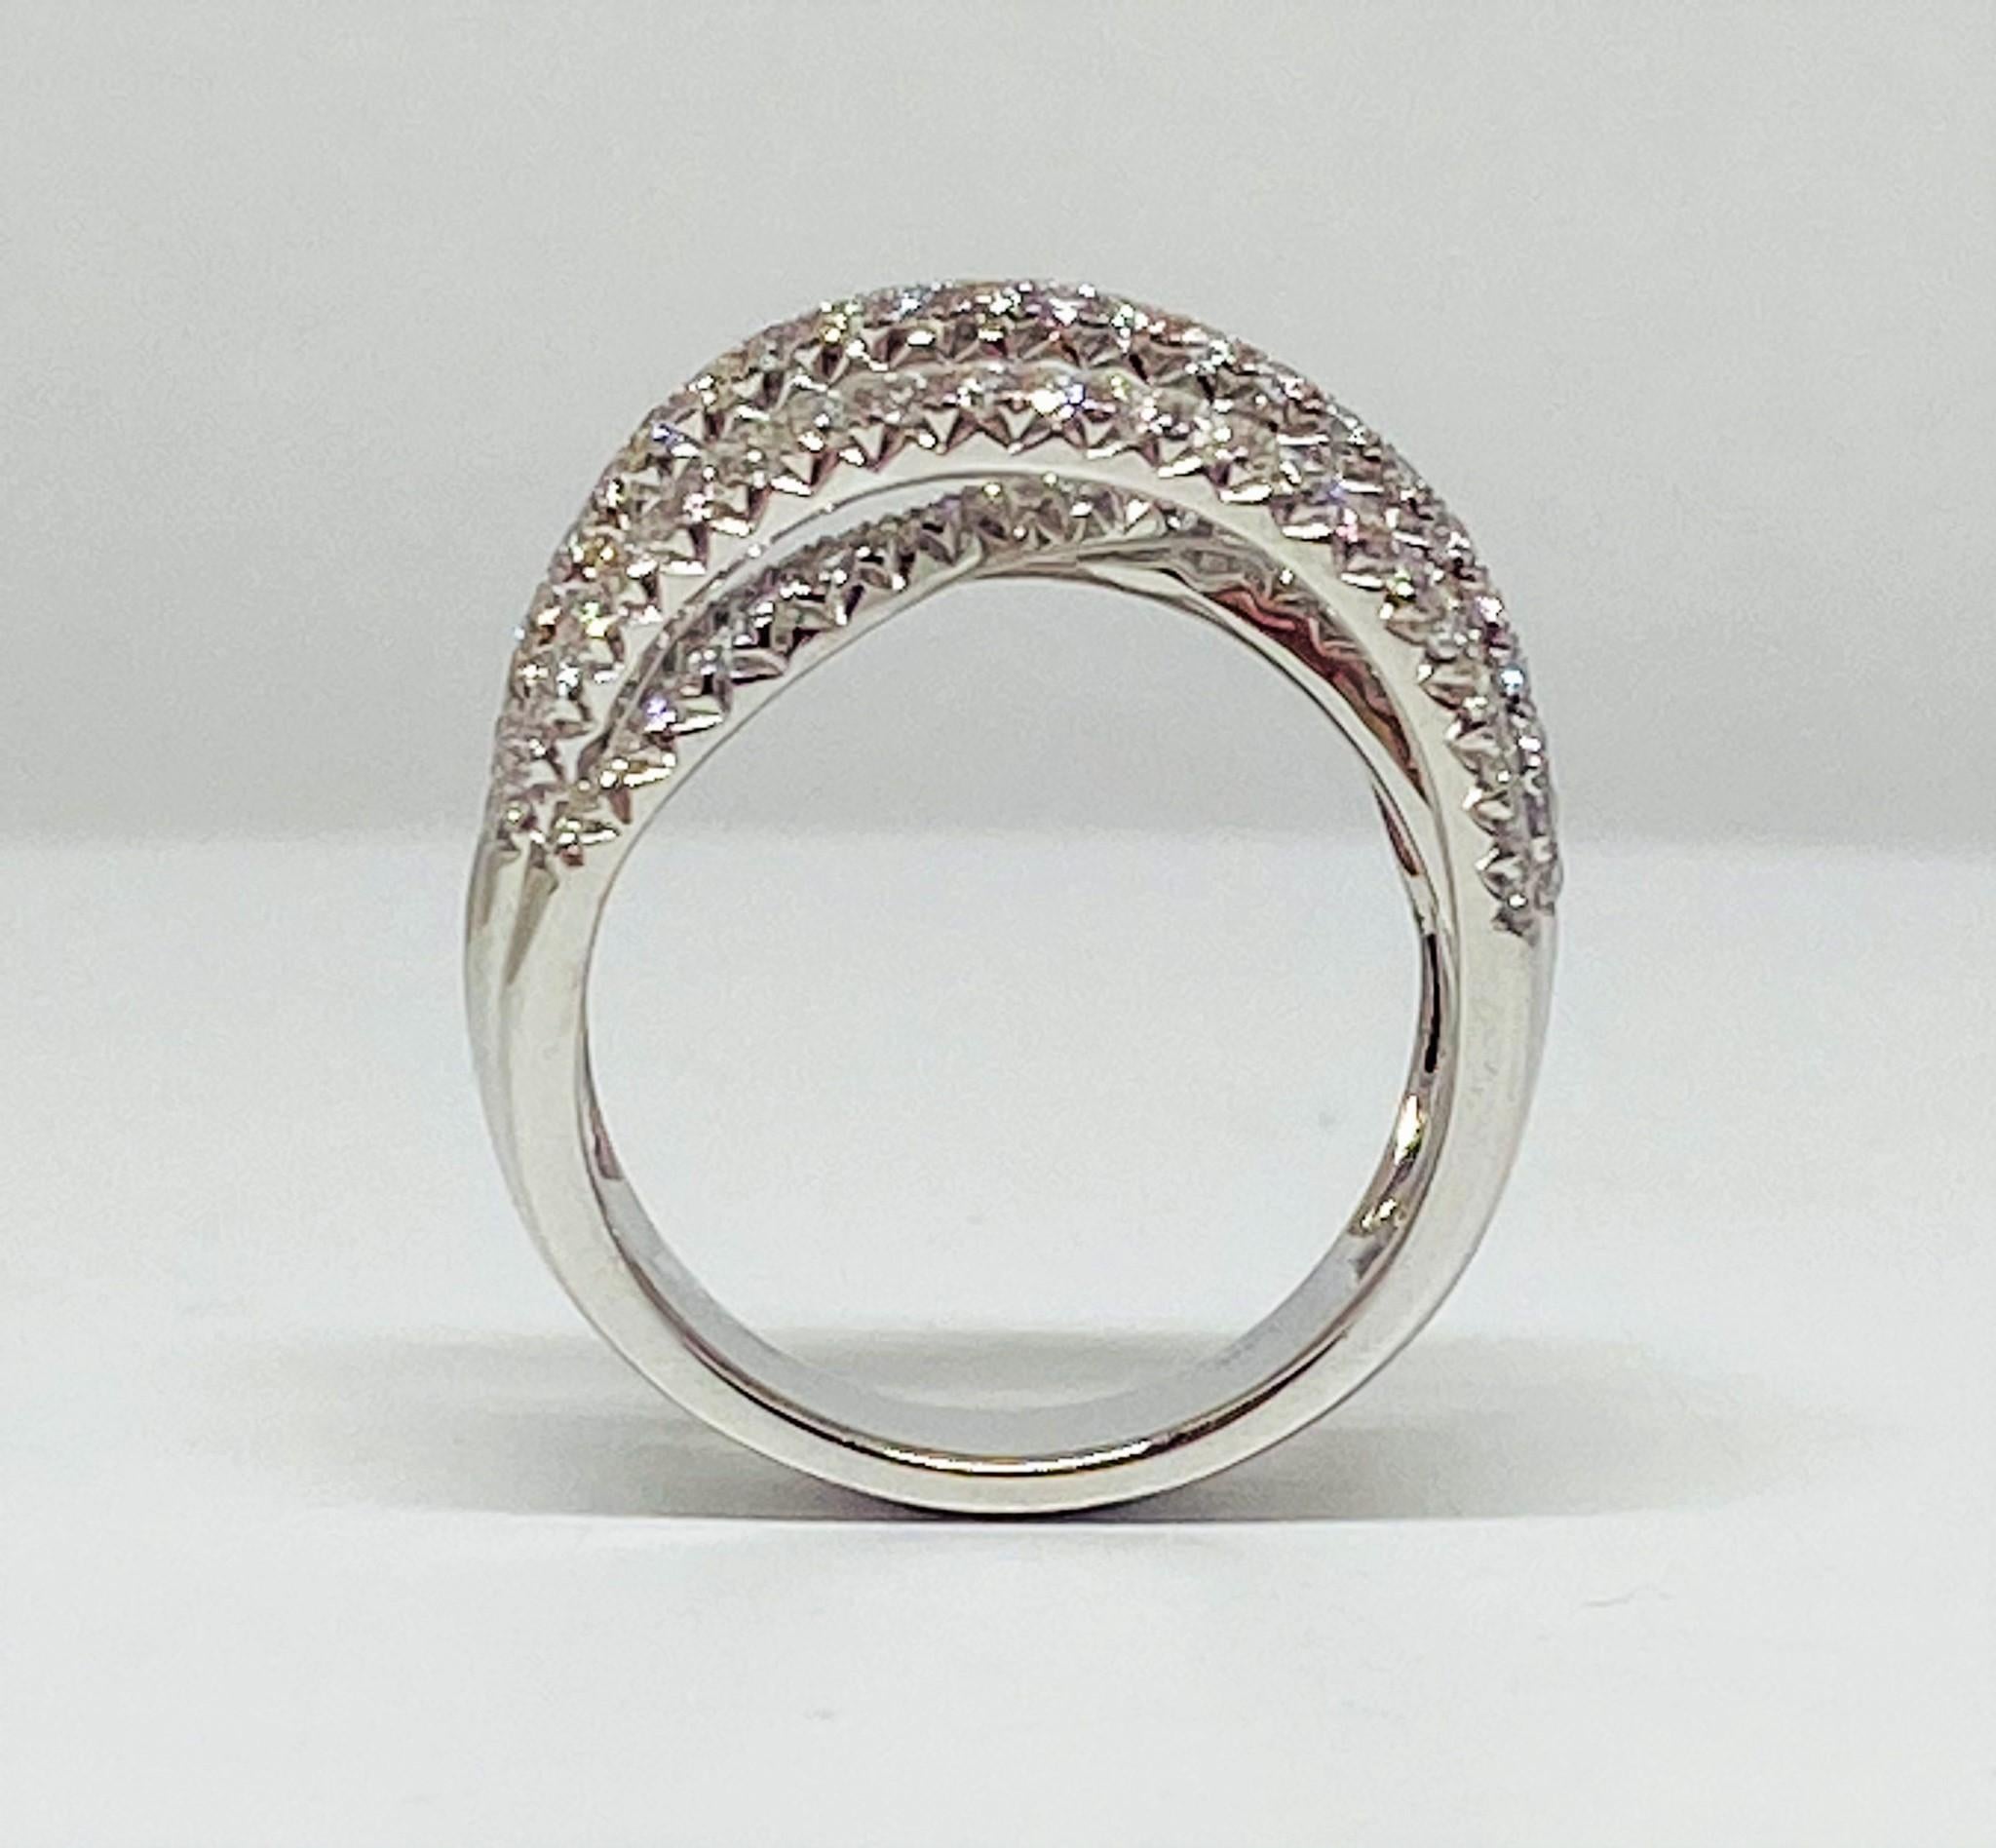 Classy contemporary style ring featuring an open weave of multiple strands of pave set white diamonds weighing a total of 1.98 carats set on a white band all in 14KT white gold. 
